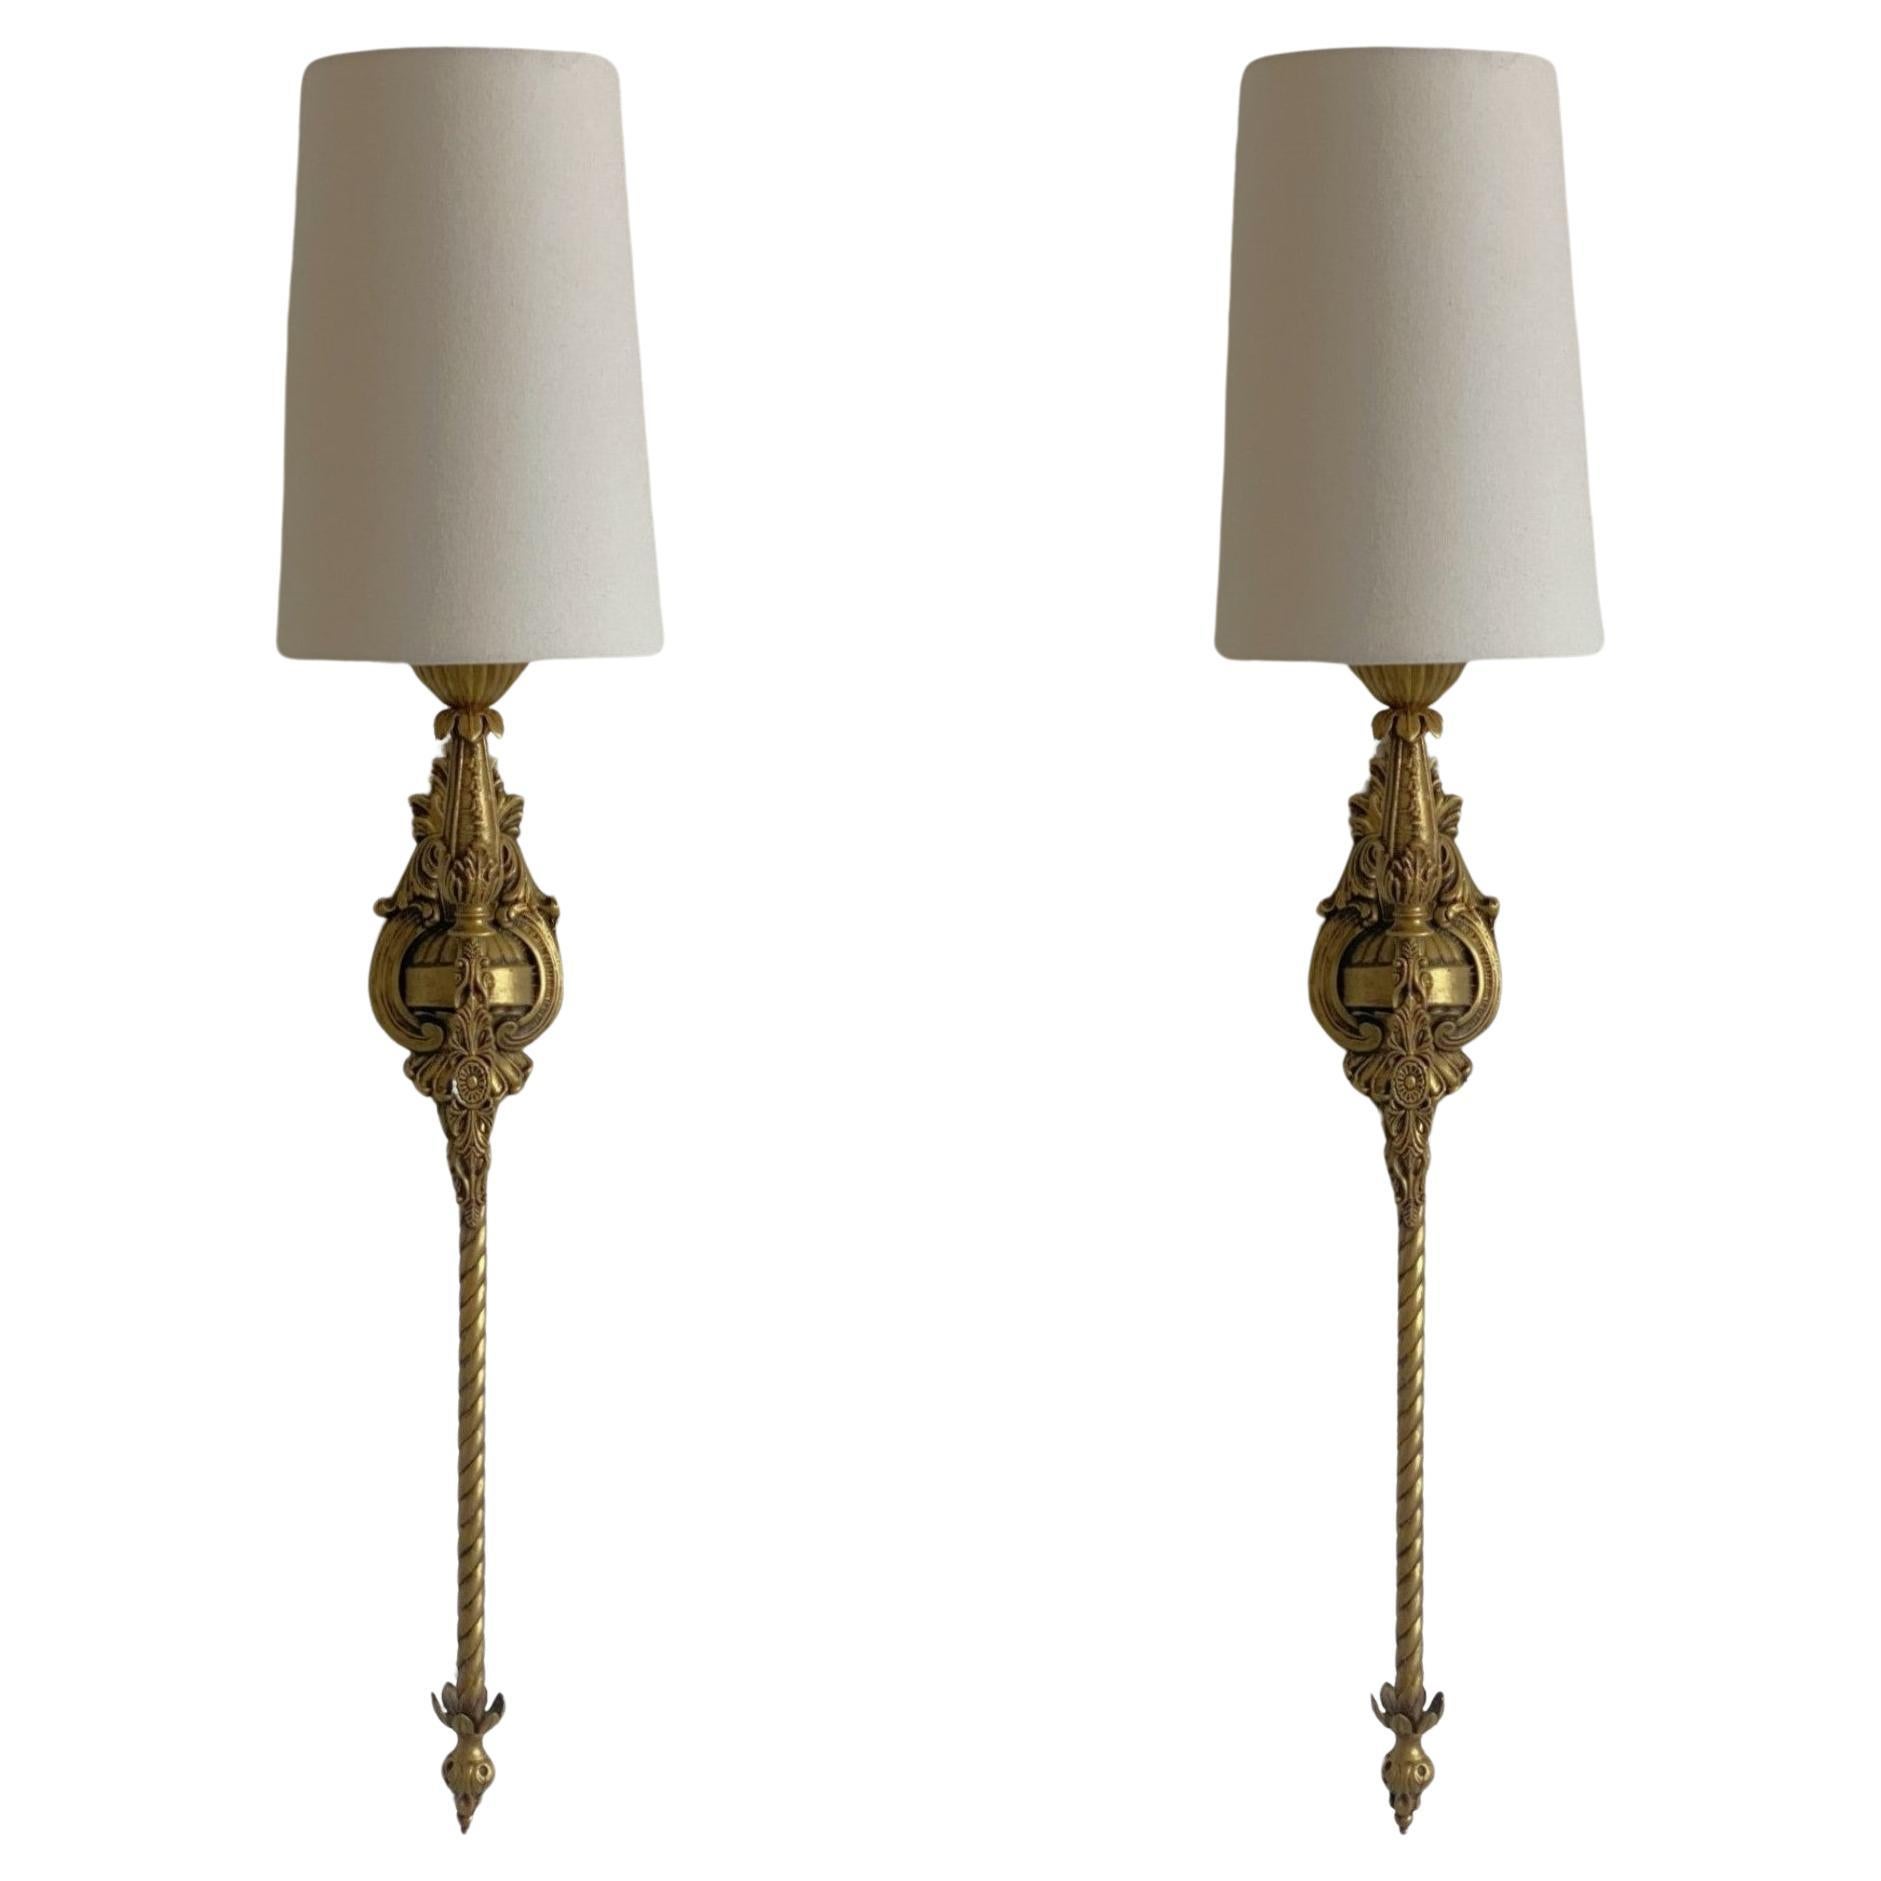 Pair of French Tall Art Deco Bronze Torchiere Wall Sconces, 1930s